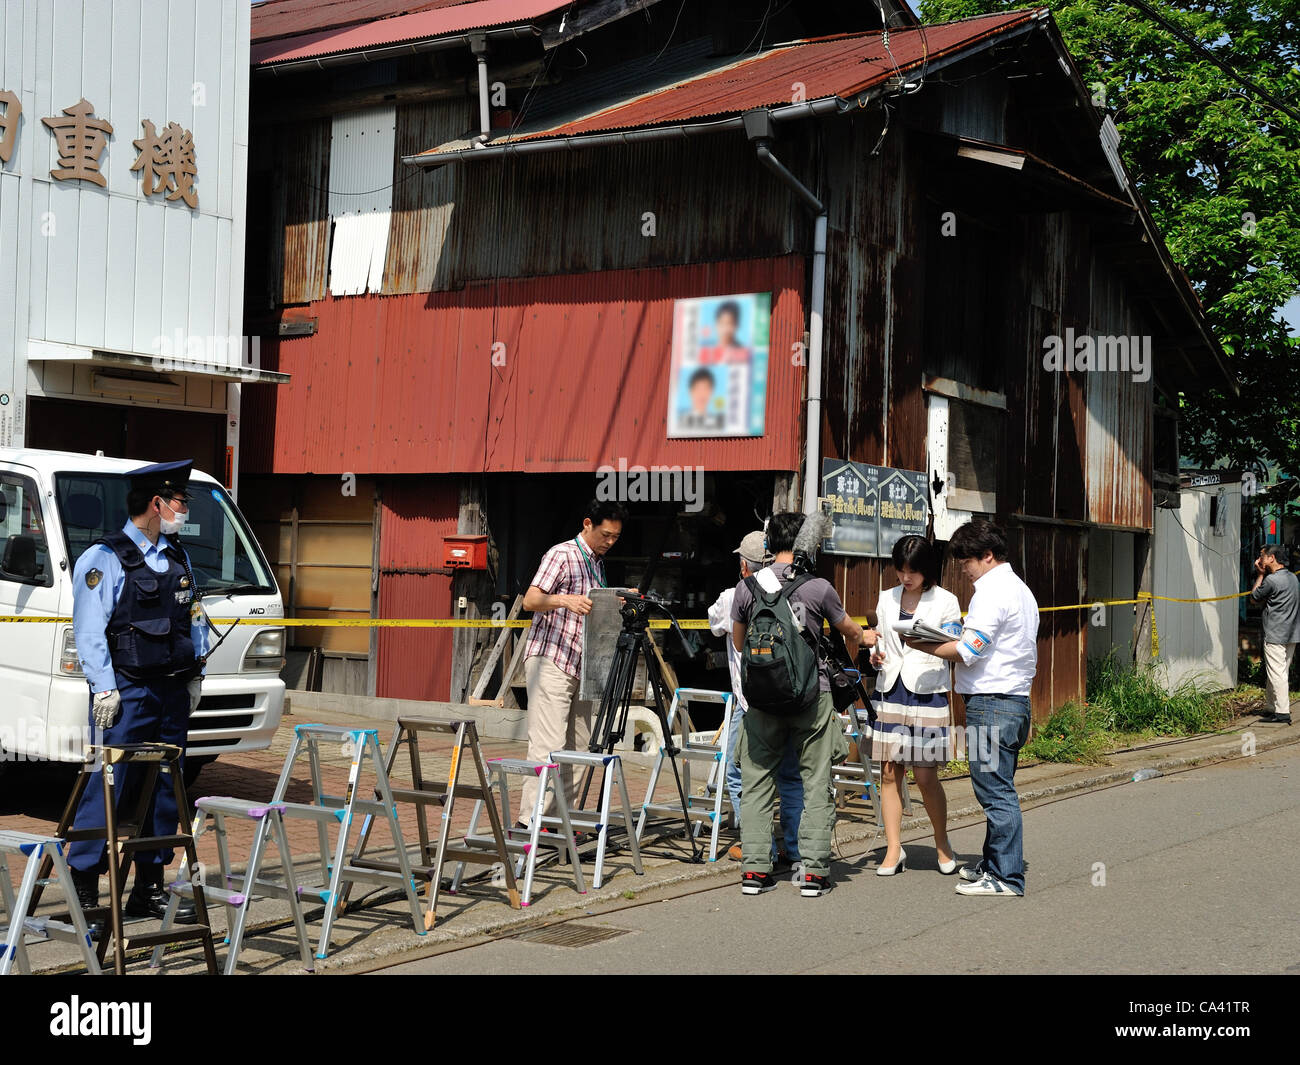 June 4, 2012, Sagamihara, Kanagawa, Japan - Aum Shinrikyo cultist Naoko Kikuchi was detained at a house where she hid out in Sagamihara,　Kanagawa Prefecture, Japan, on Sunday, June 3, 2012.  She transferred to the Metropolitan Police Department in Tokyo, where she was arrested for murder and attempt Stock Photo